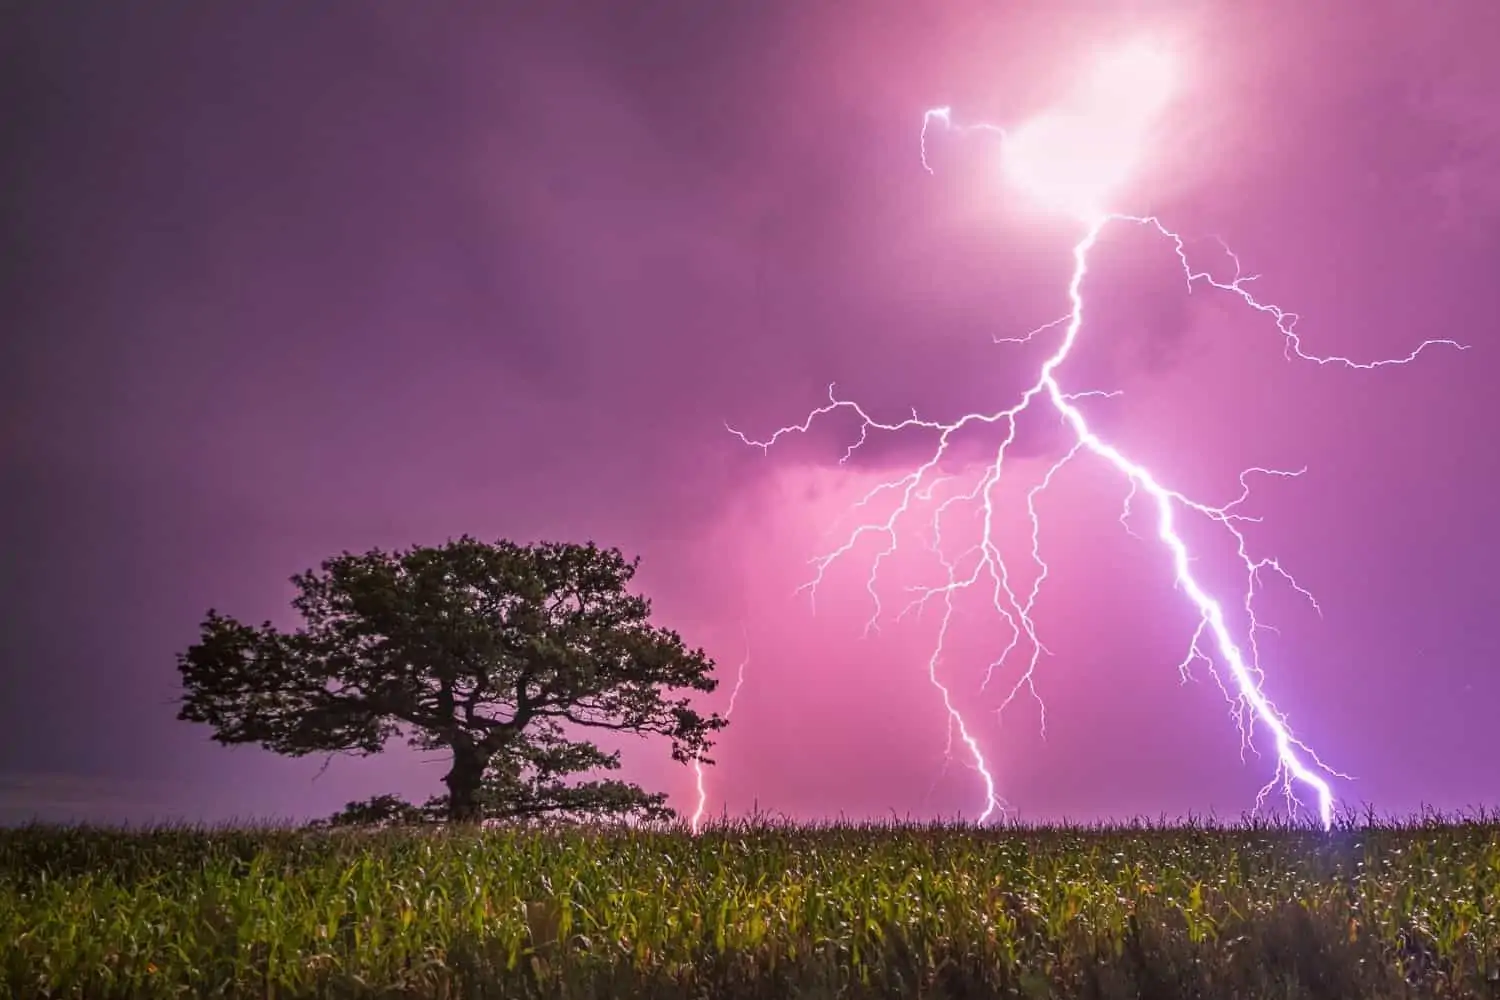 After nine children were struck by lightning, two lost their lives